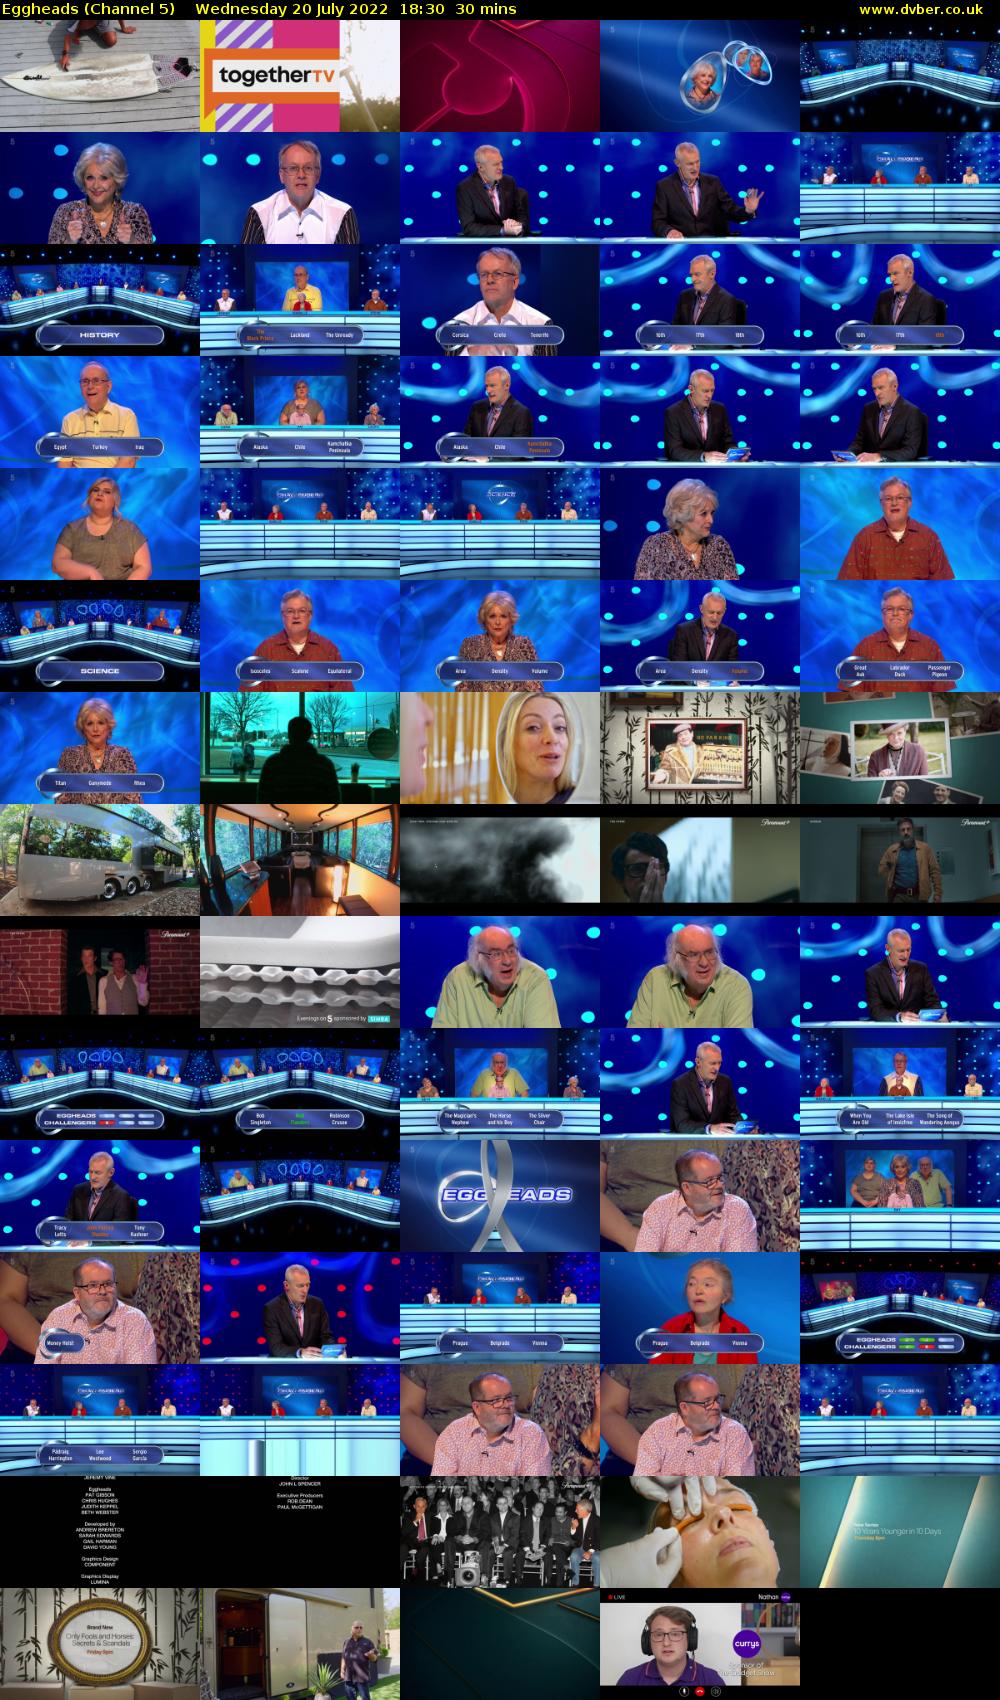 Eggheads (Channel 5) Wednesday 20 July 2022 18:30 - 19:00